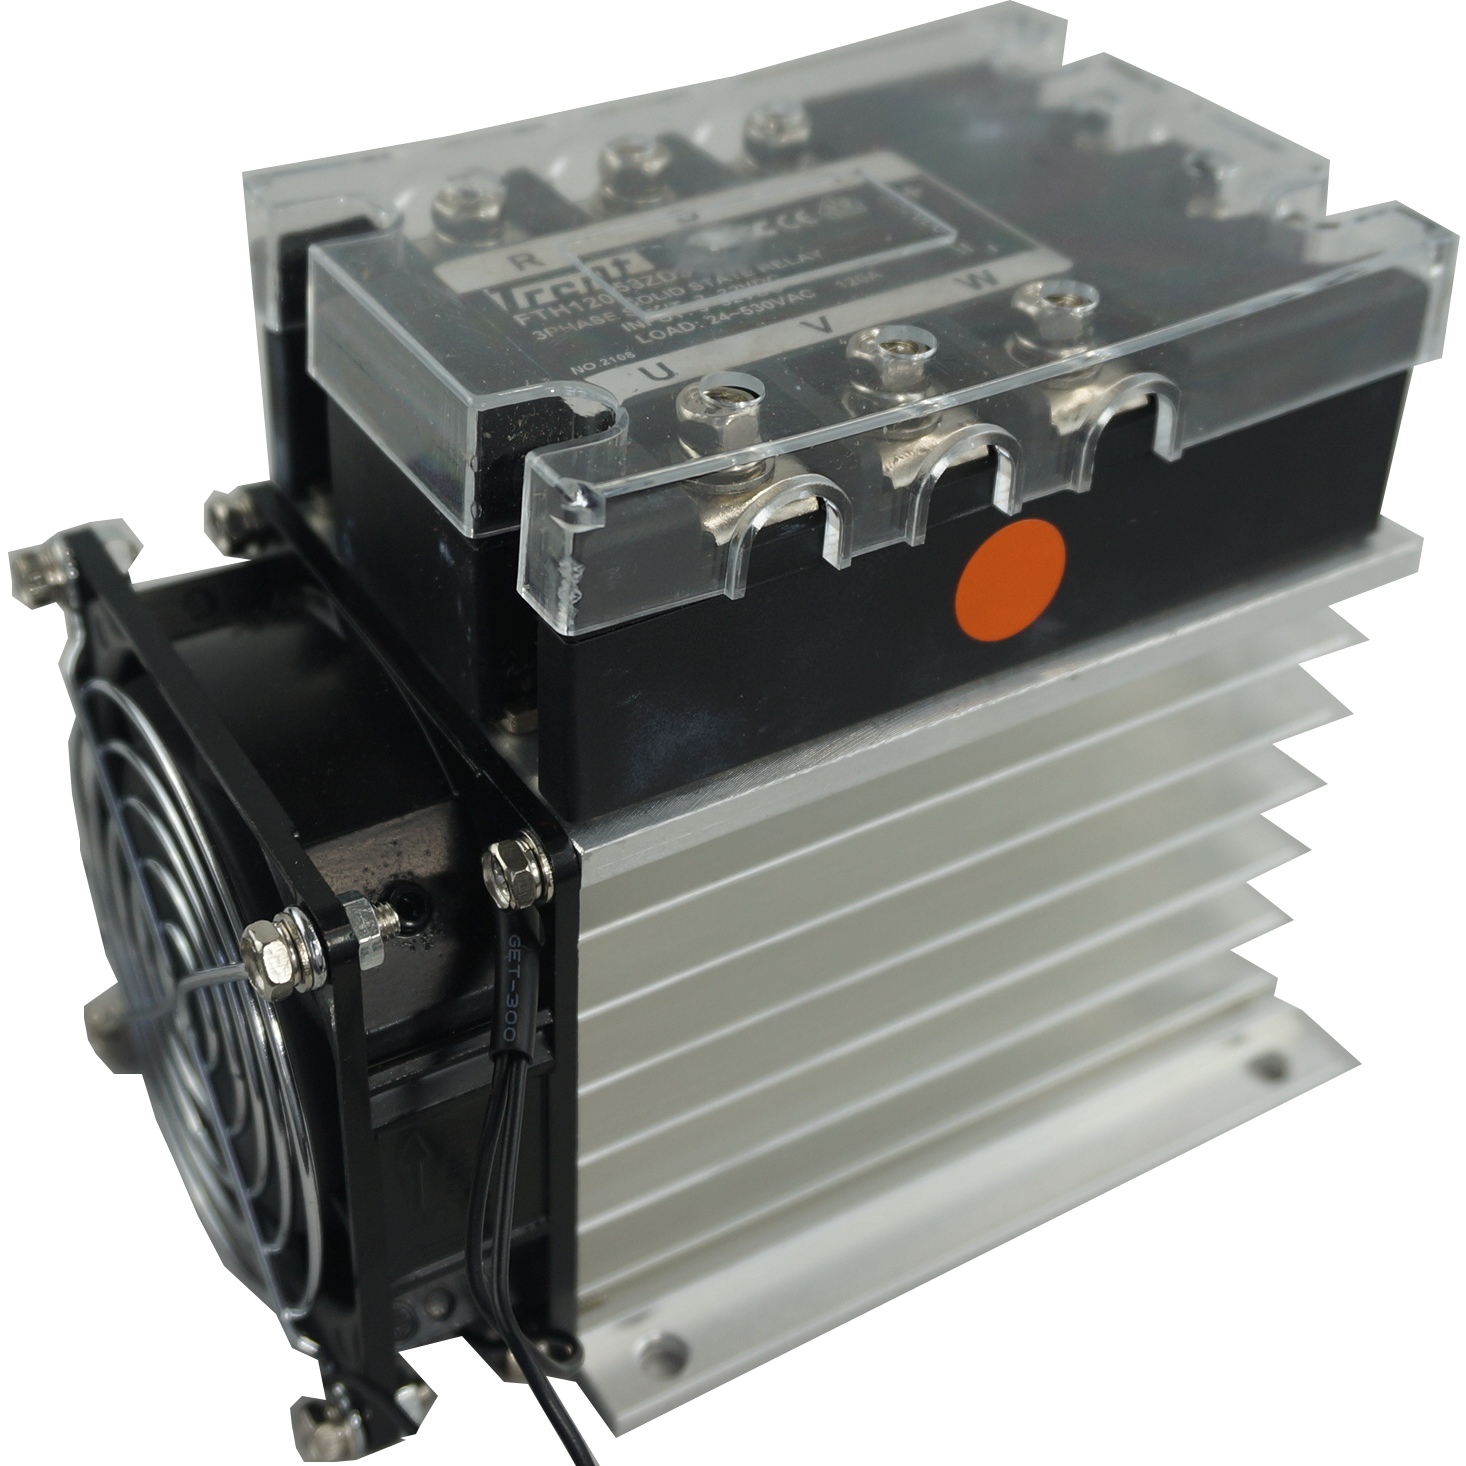 FTH6053ZA4 + HS212F, Solid State Relay, and Heatsink Assembly, 3 Phase 90-280VAC Control, 36 Amp per phase @ 40 Deg C, 48-530VAC Load, LED Status Indicator, with IP20 Cover